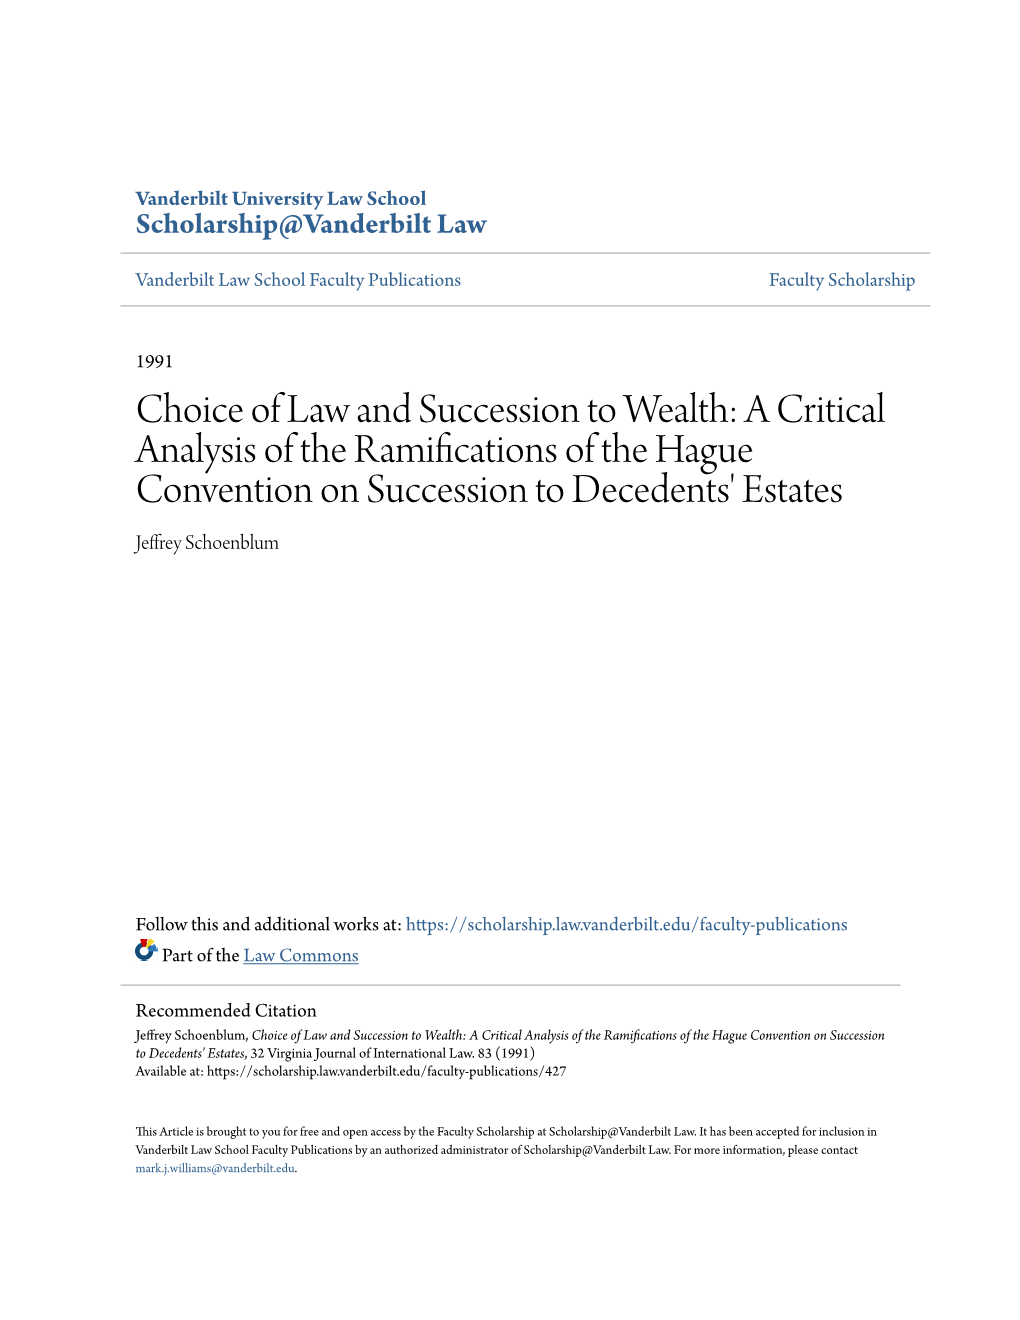 Choice of Law and Succession to Wealth: a Critical Analysis of the Ramifications of the Hague Convention on Succession to Decedents' Estates Jeffrey Schoenblum